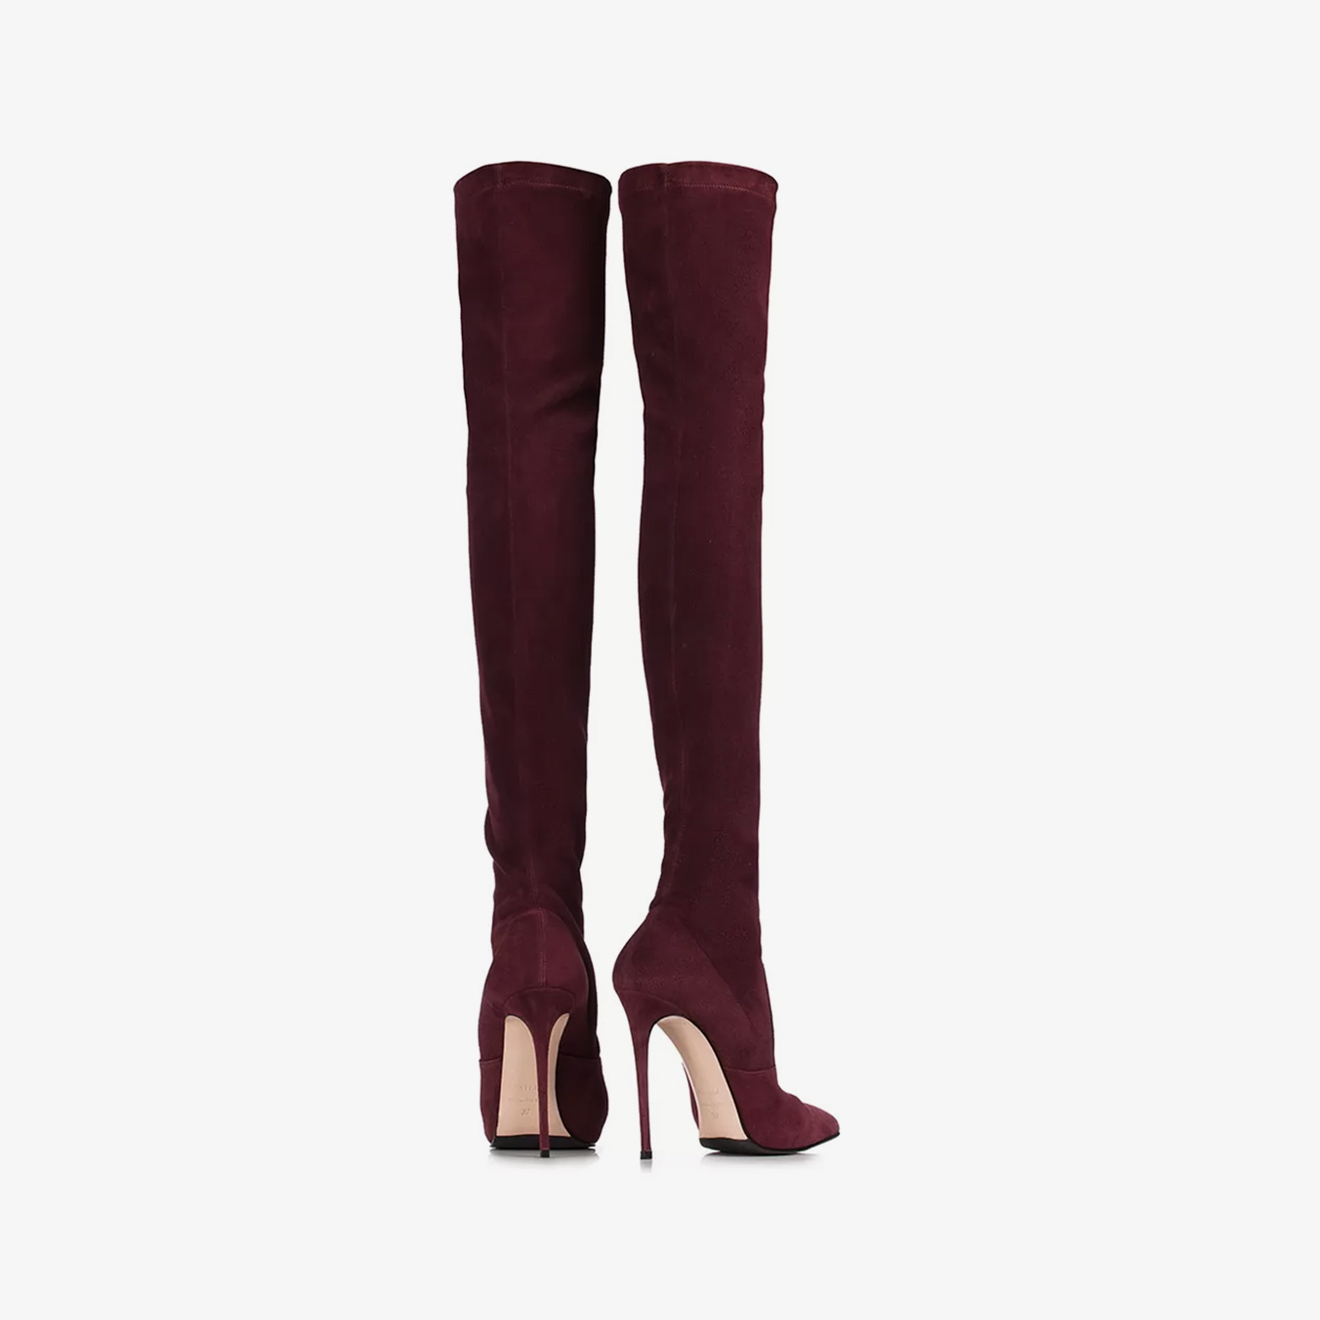 EVA THIGH-HIGH BOOT 120 mm - Le Silla official outlet